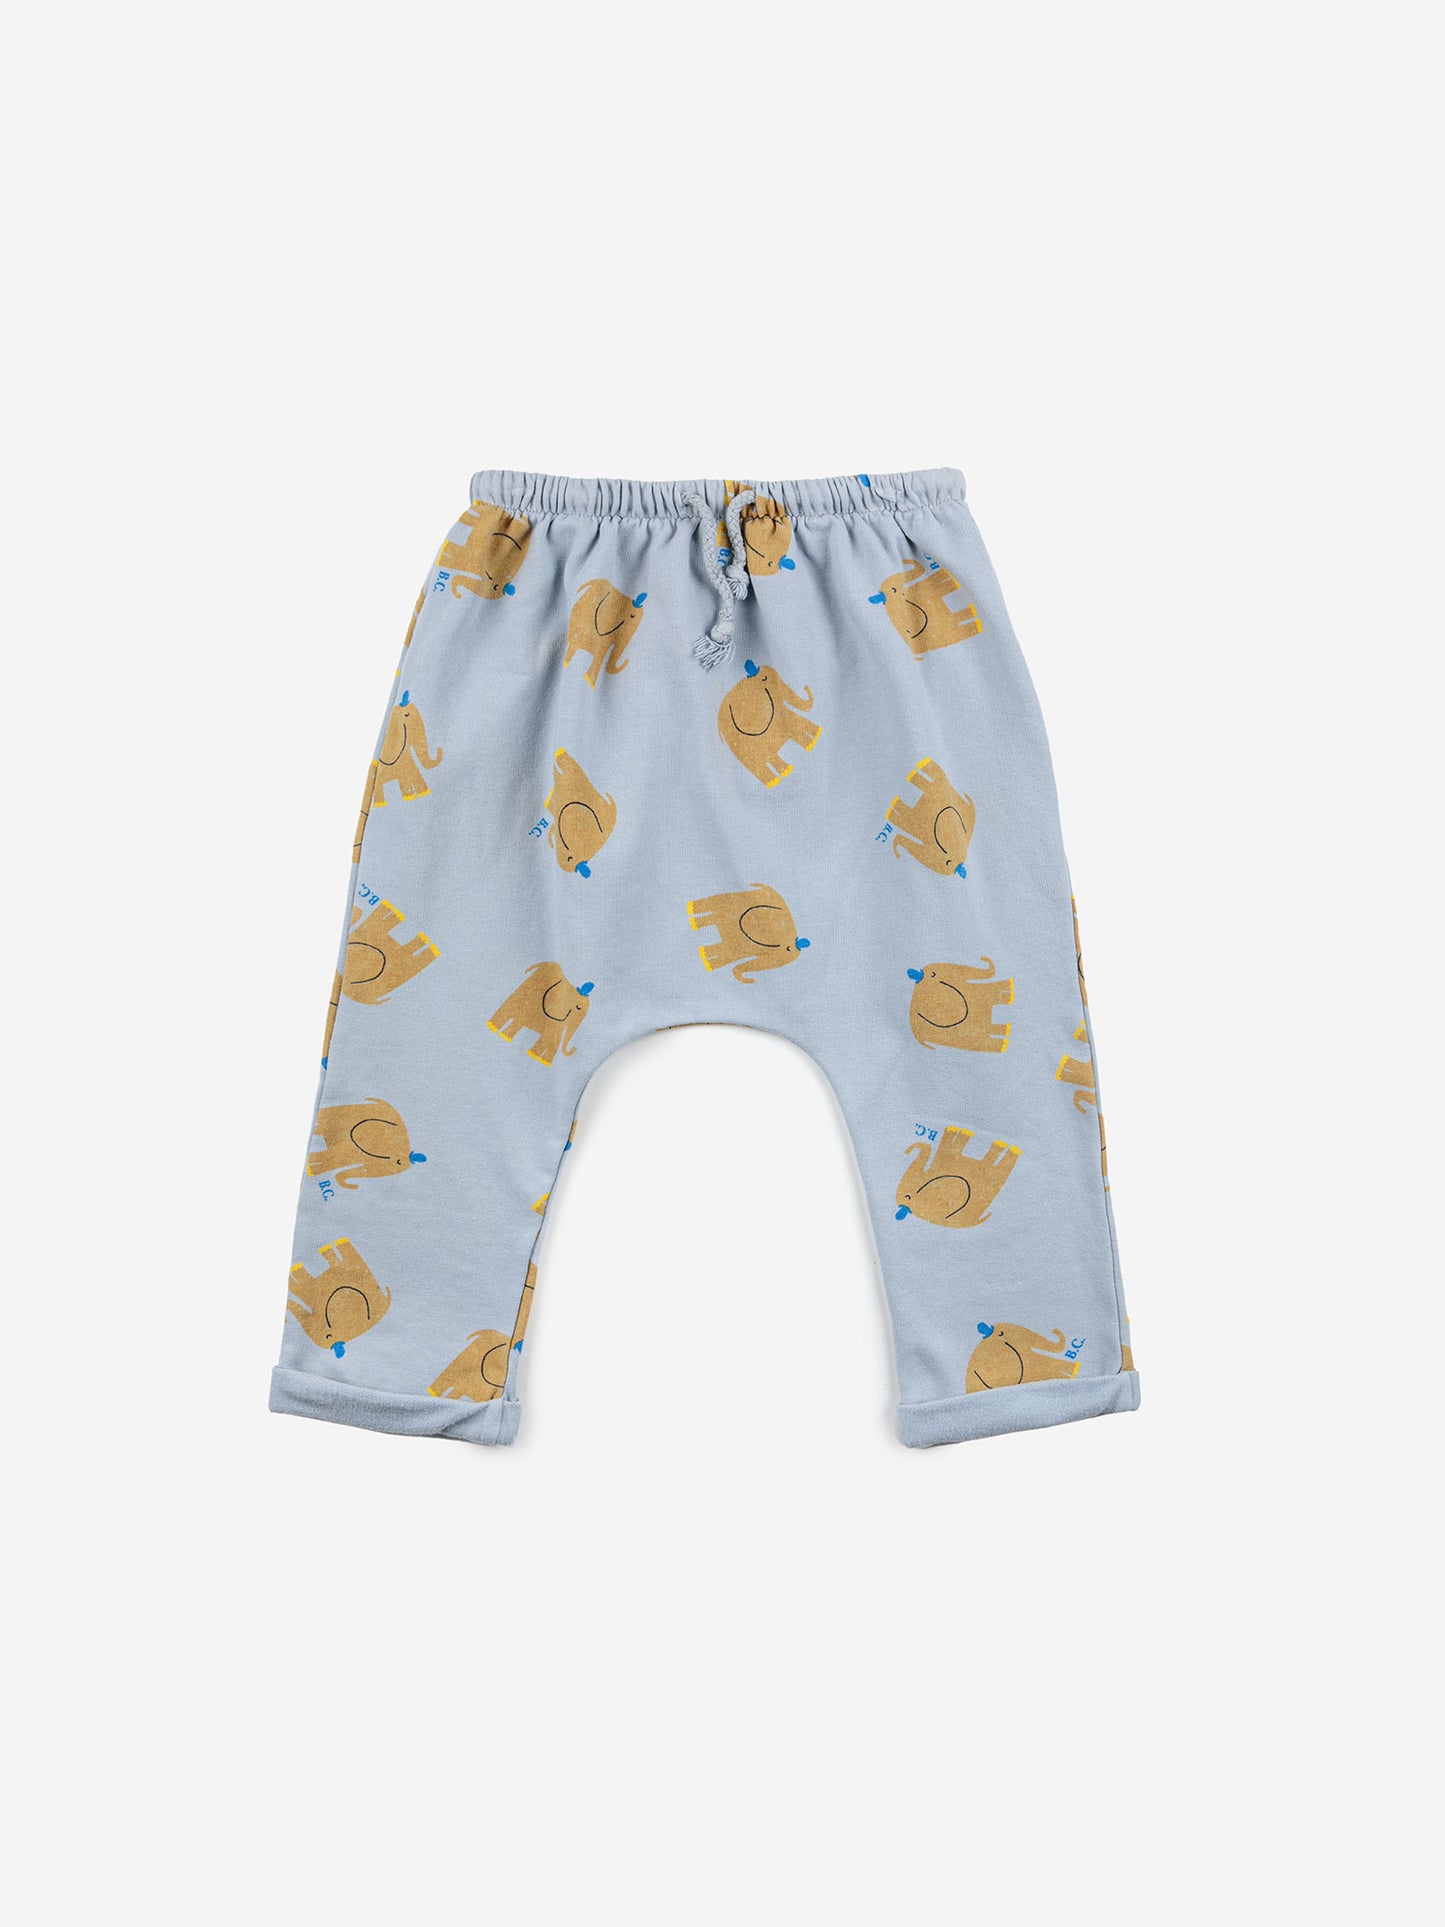 Baby The Elephant all over harem pants